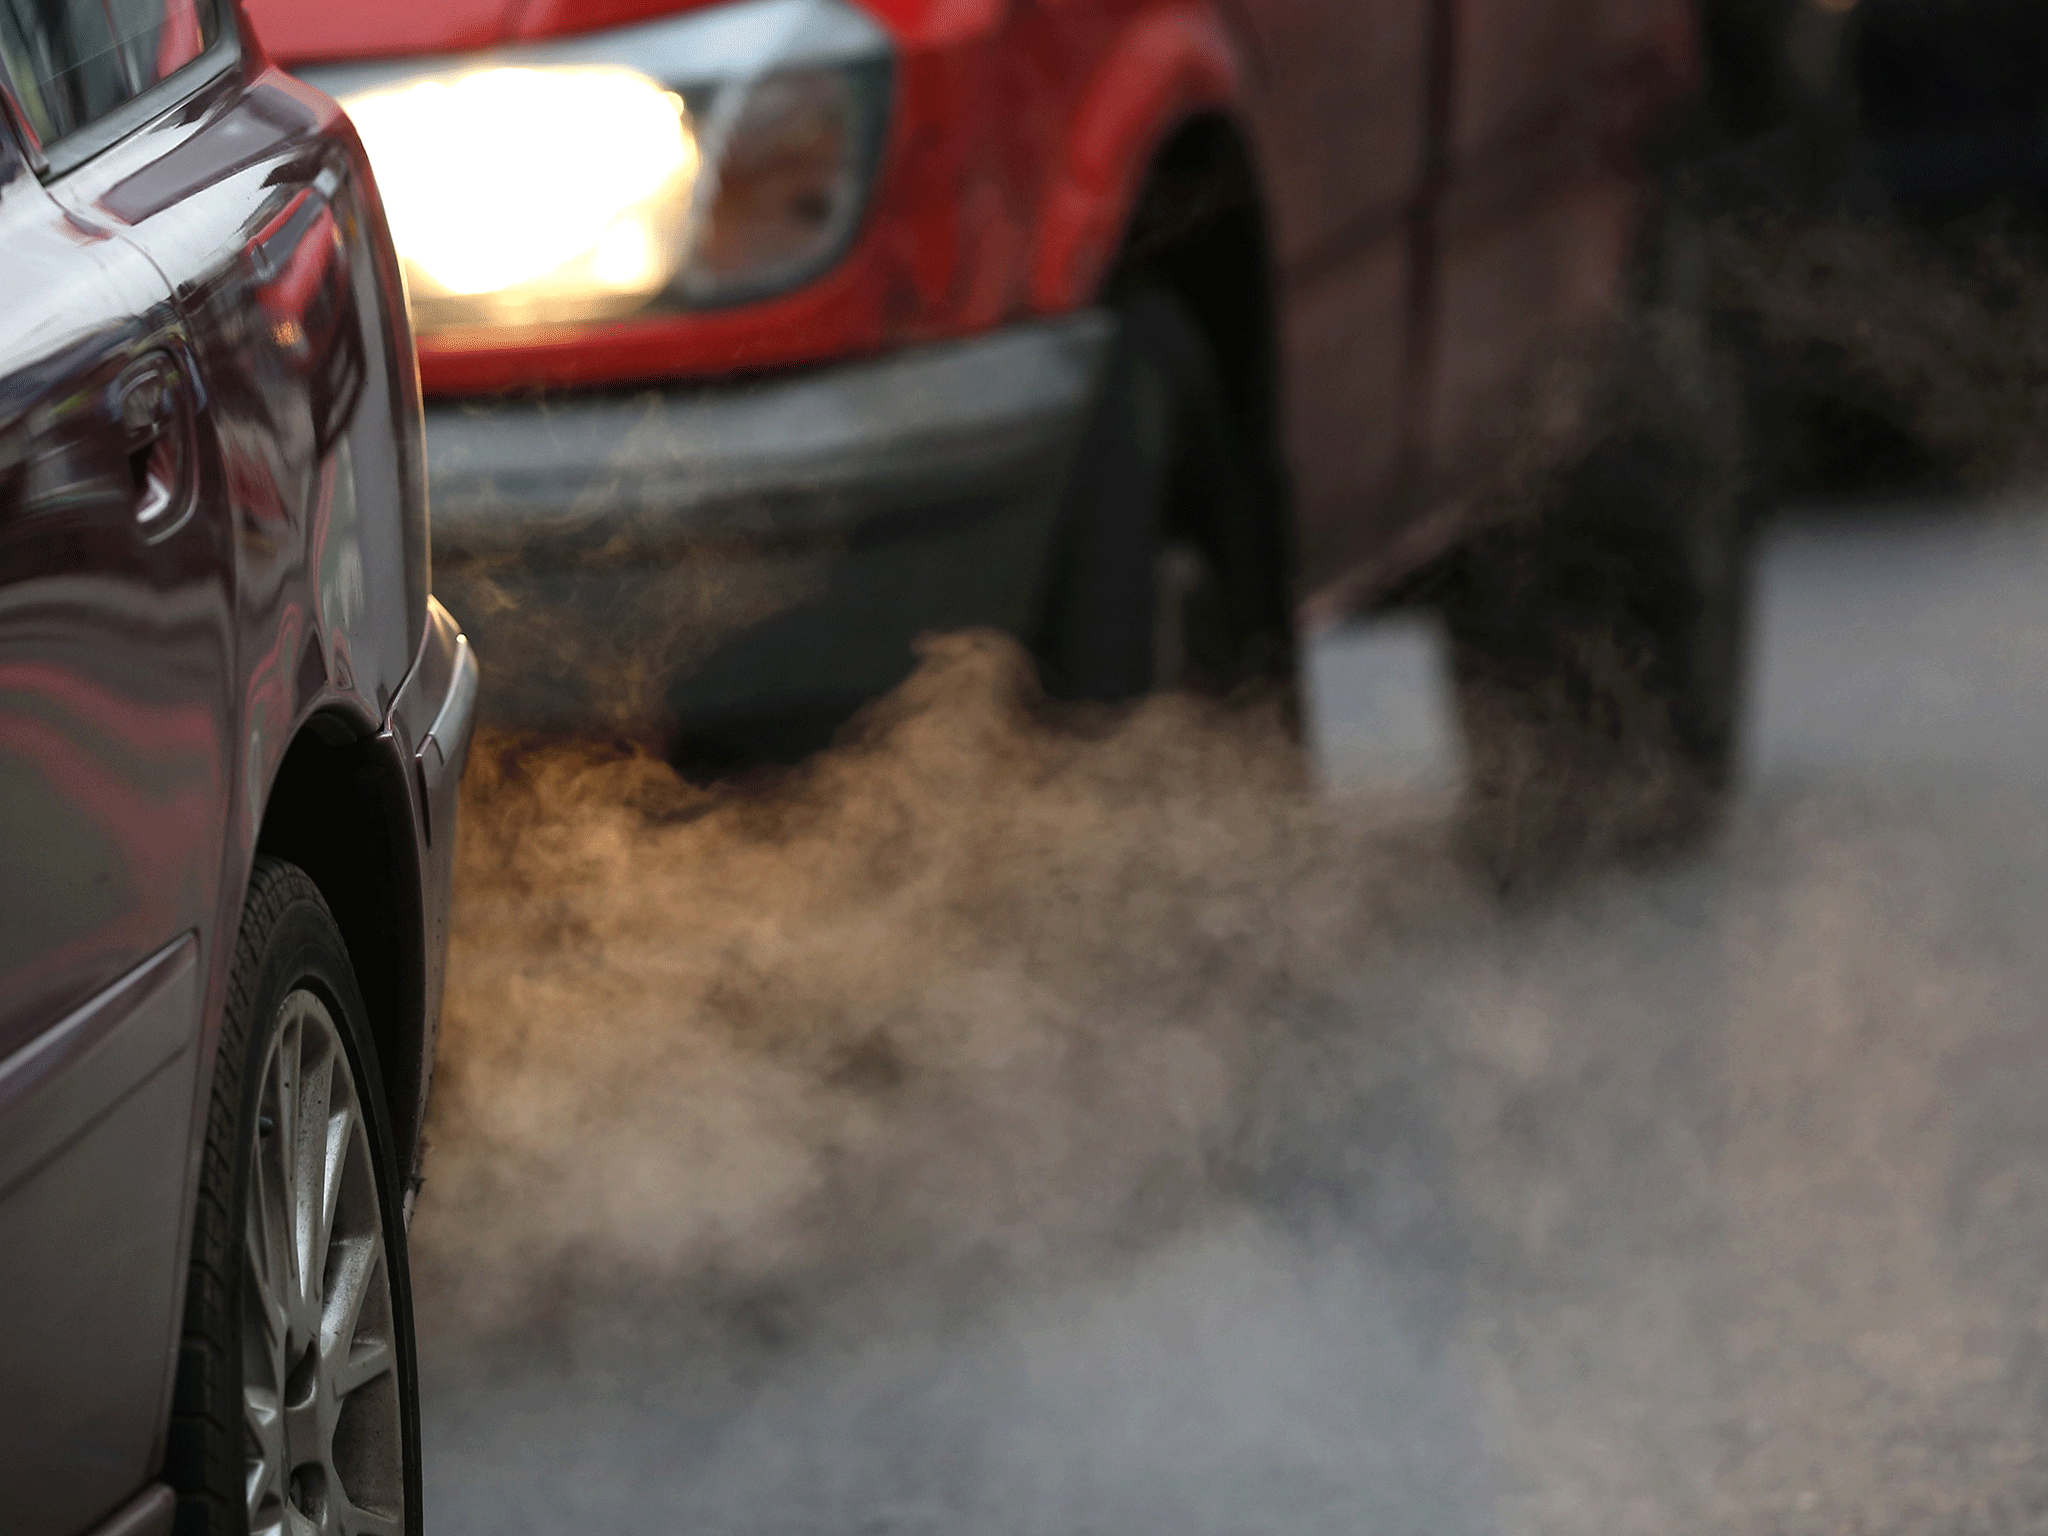 Pressure grows on London drivers to junk polluting vehicles for greener alternative